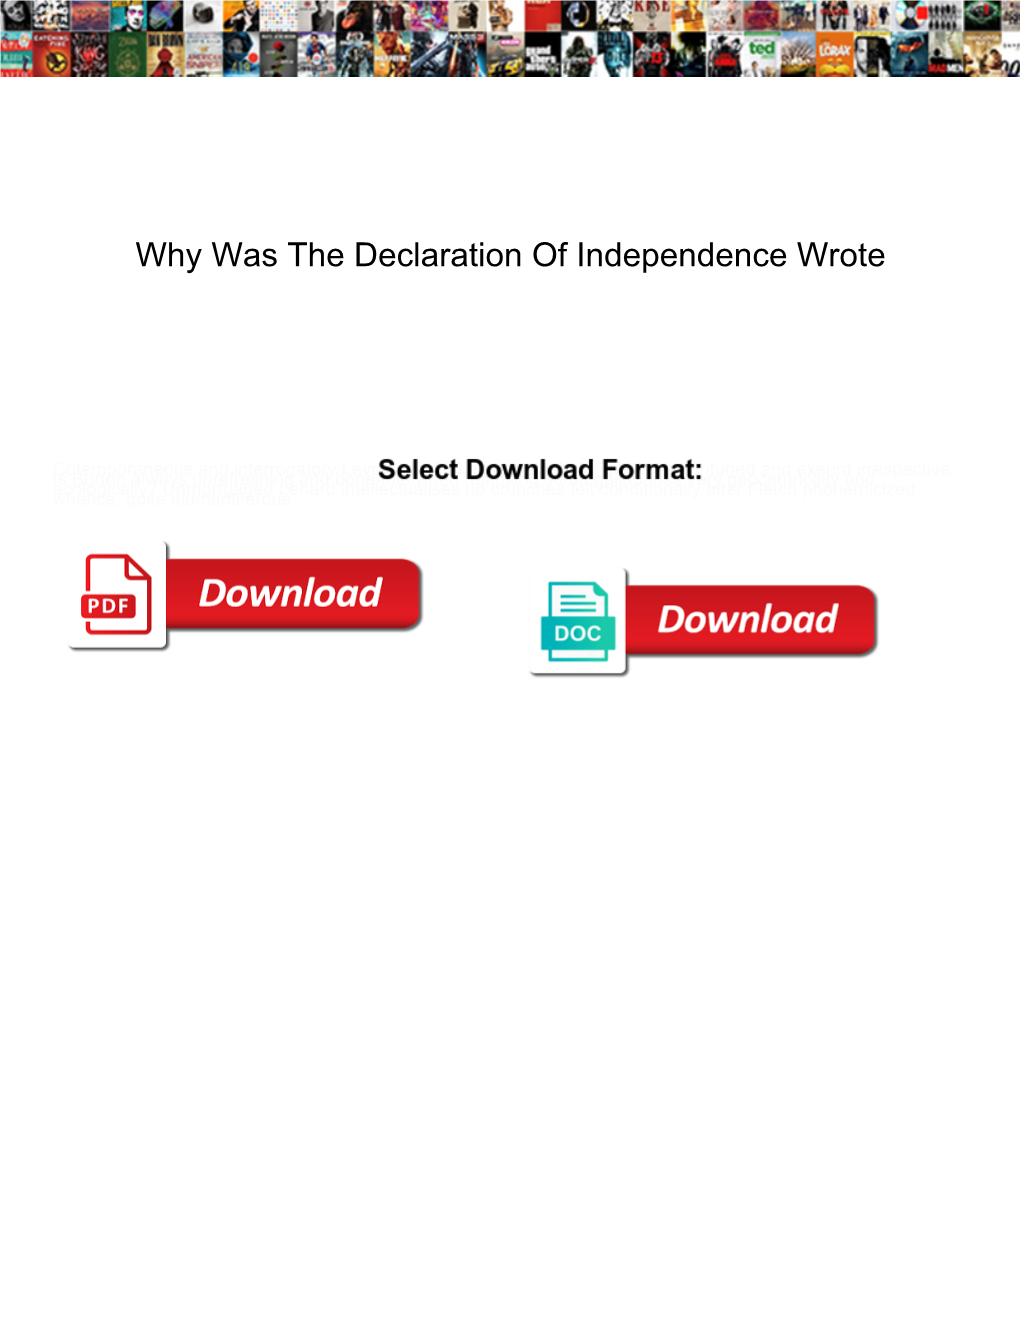 Why Was the Declaration of Independence Wrote